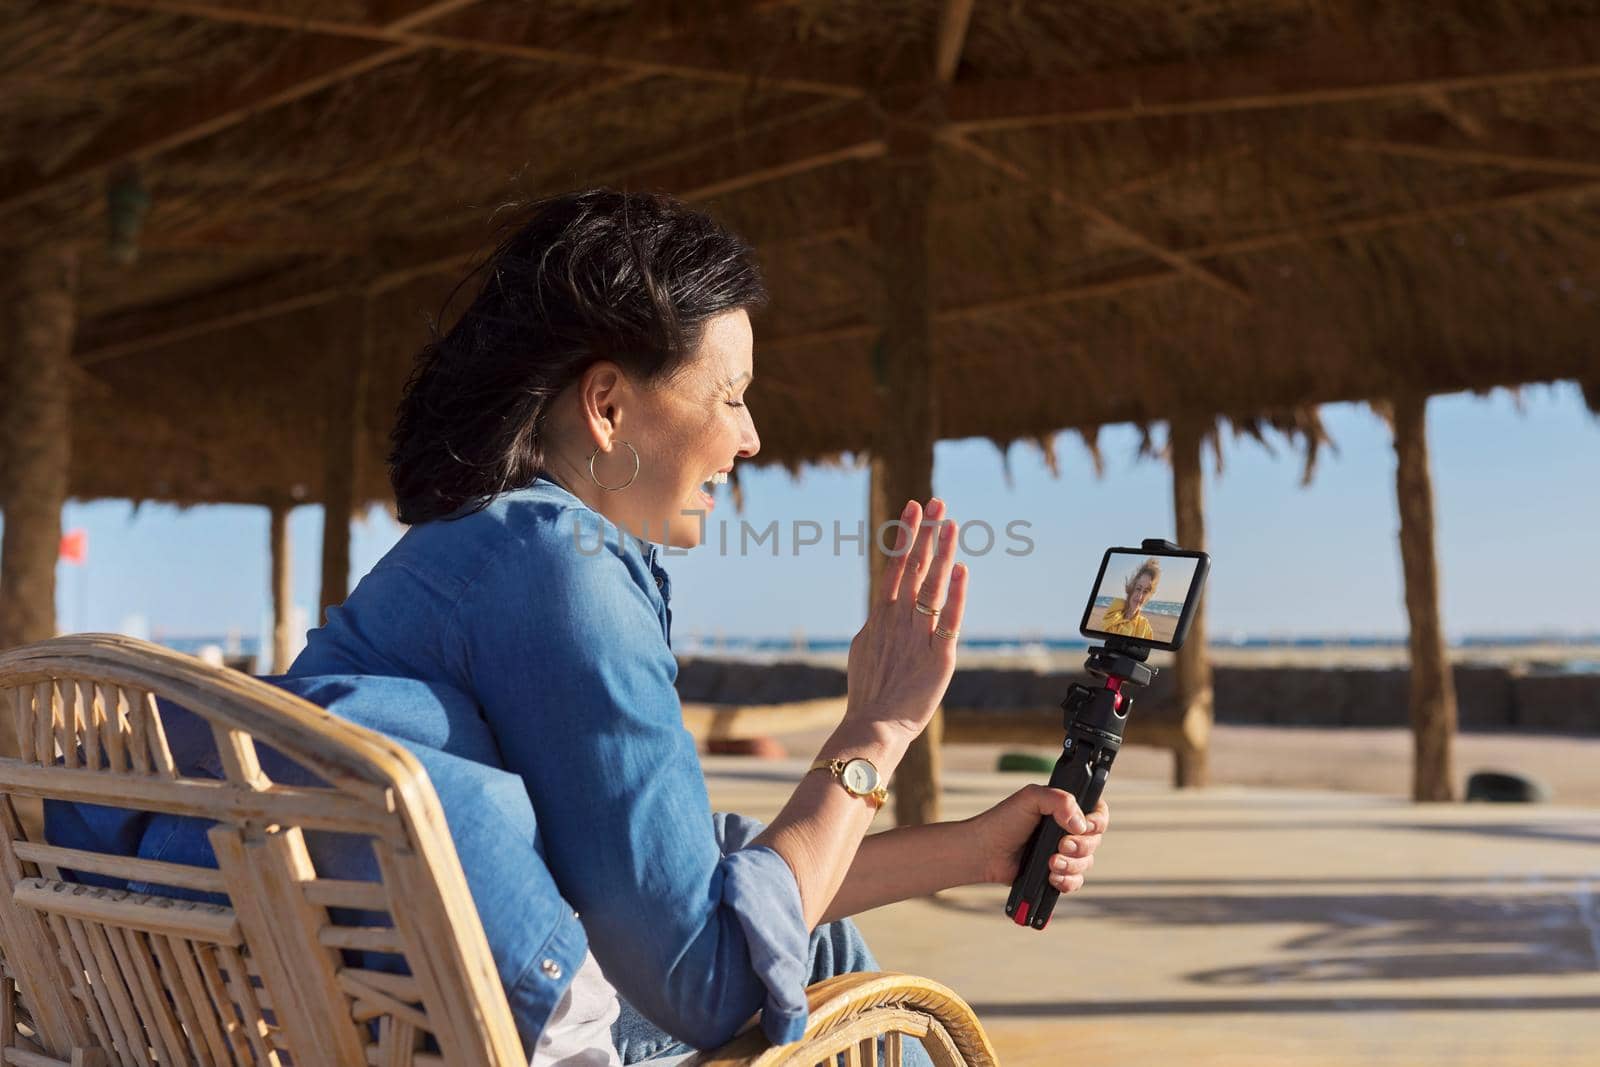 Middle aged woman looking at smartphone webcam talking recording video on sandy beach. Female blogger vlogger using video call on smartphone for blog, online stream, natural sea resort landscape